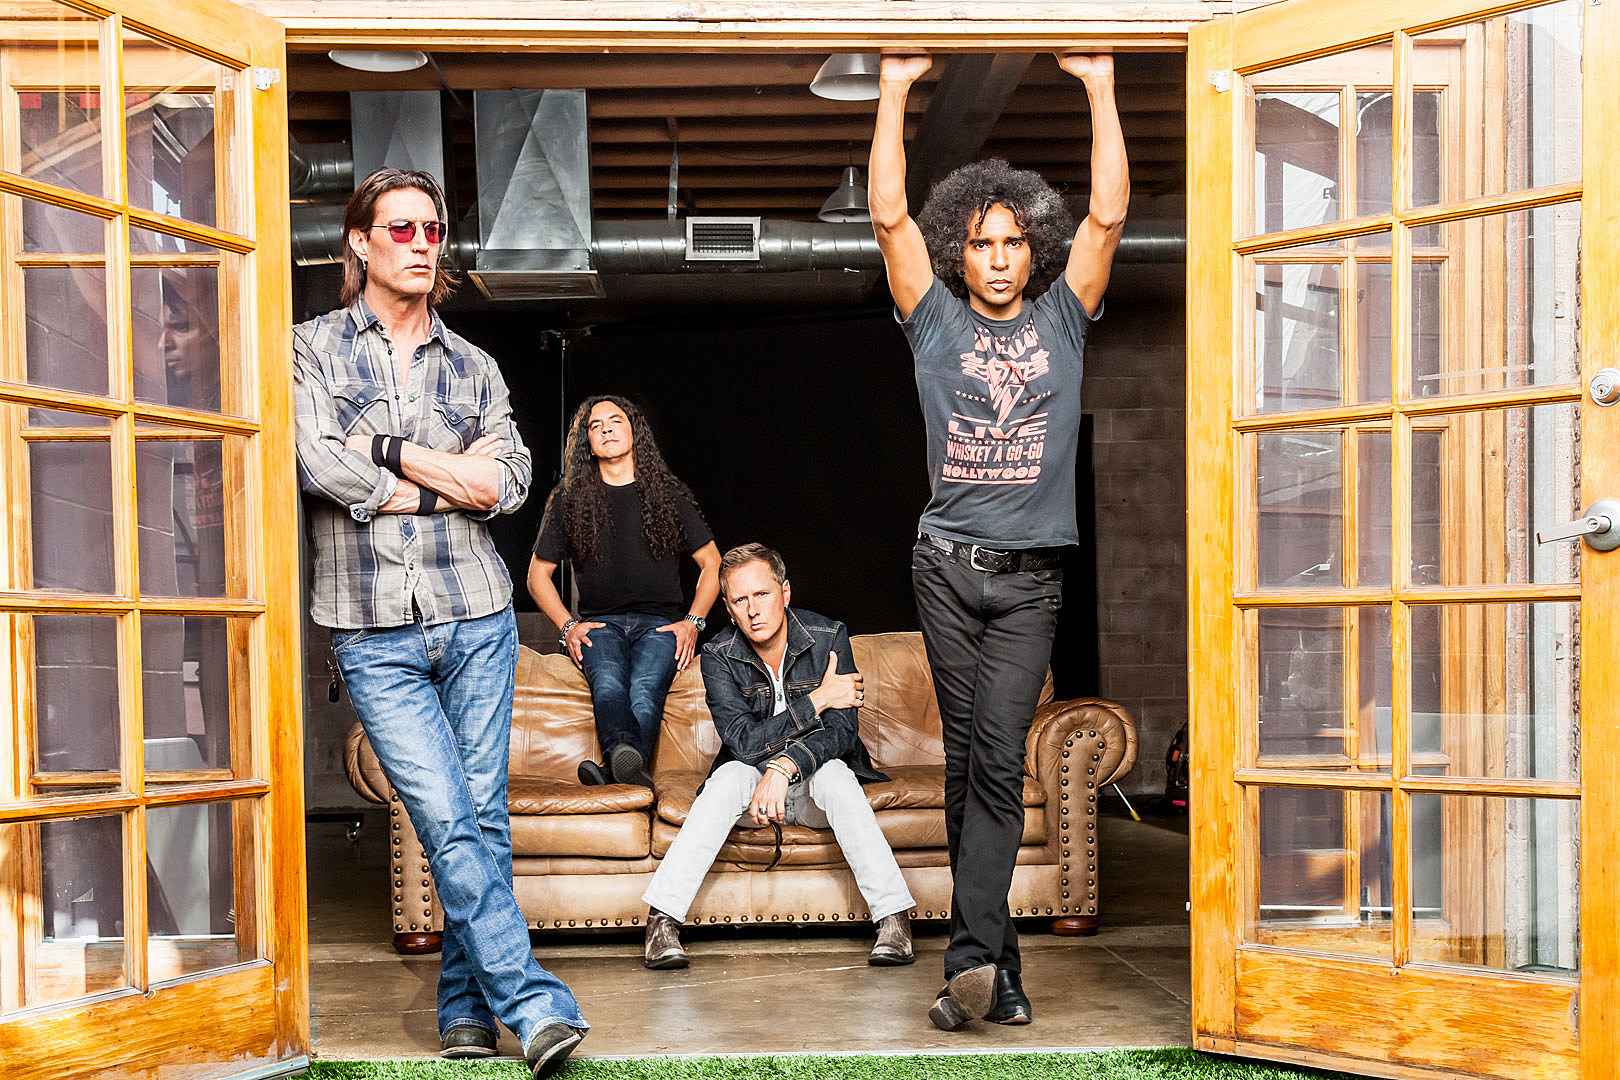 Alice in Chains Return to the Road With Spring 2018 Tour